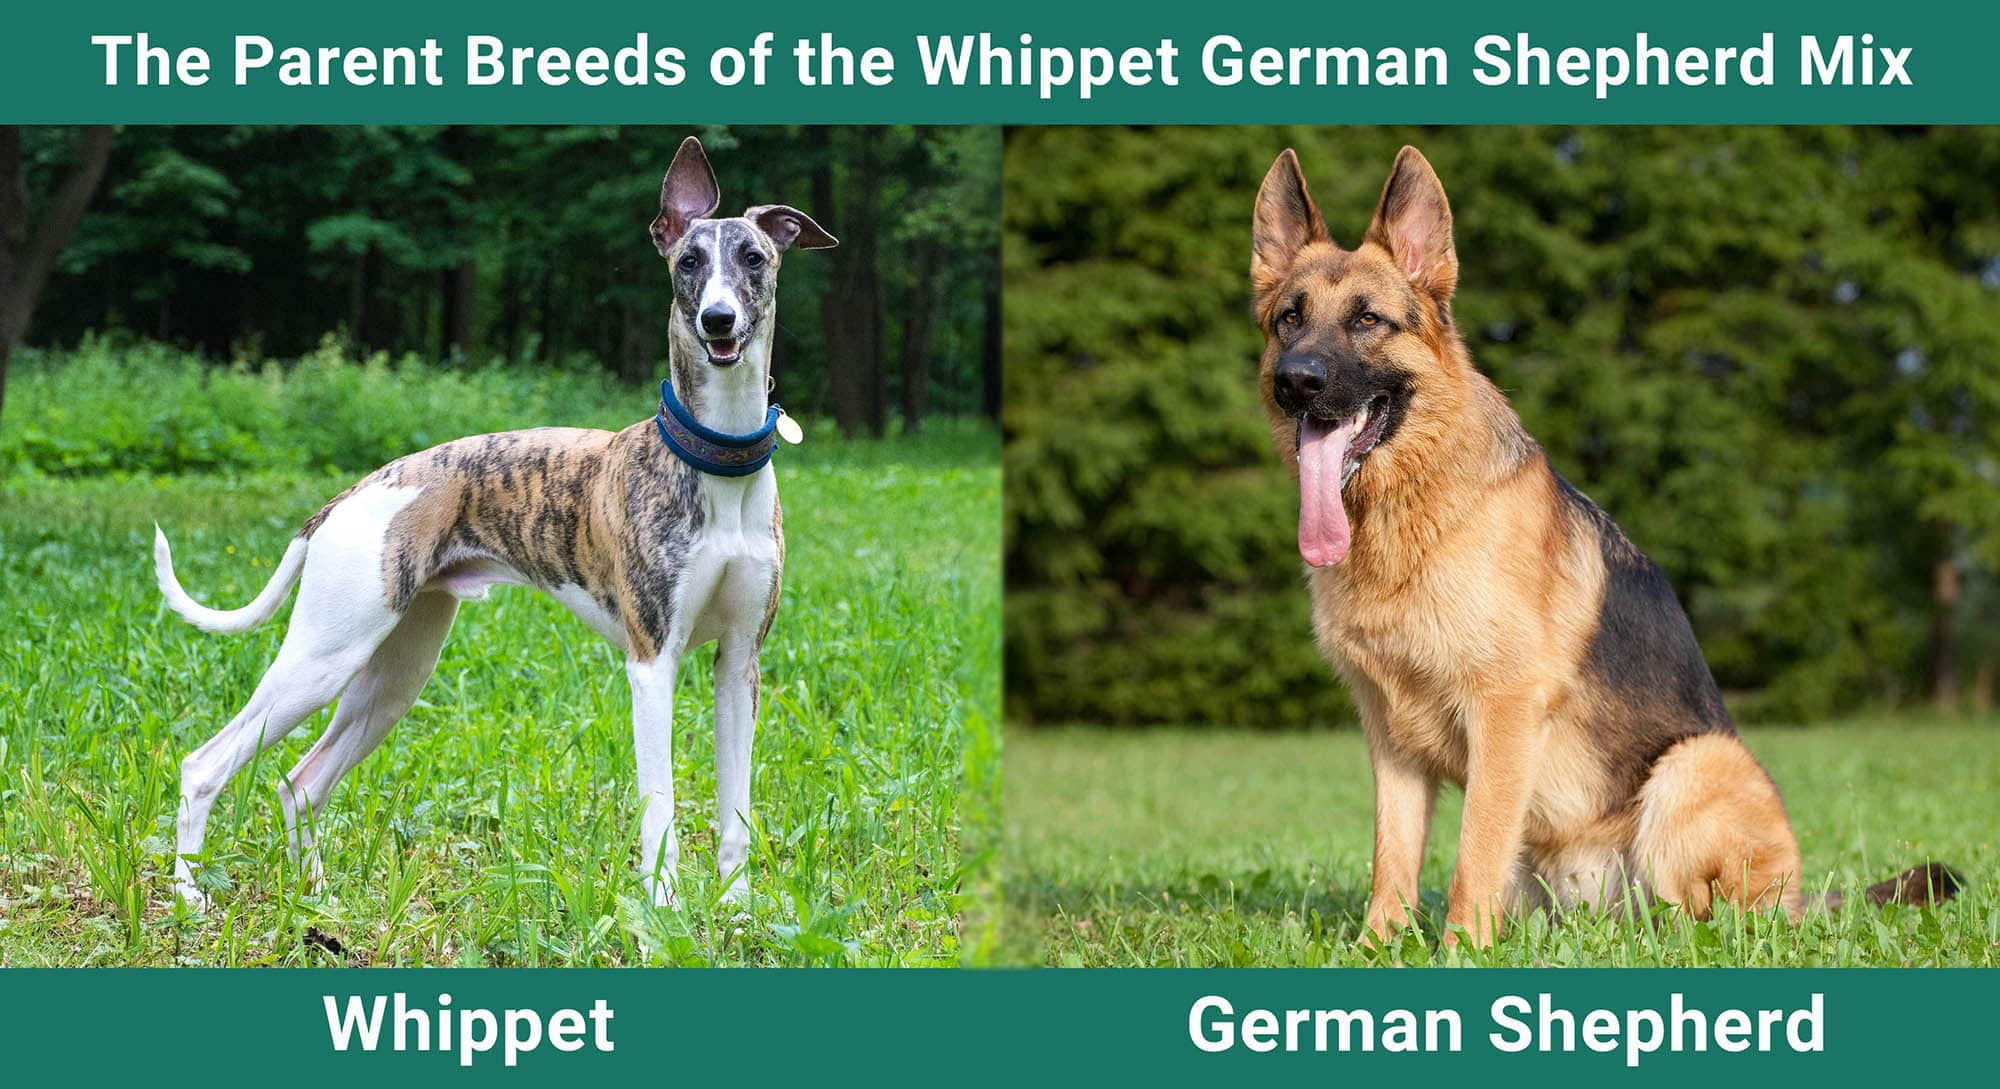 The Parent Breeds of the Whippet German Shepherd Mix